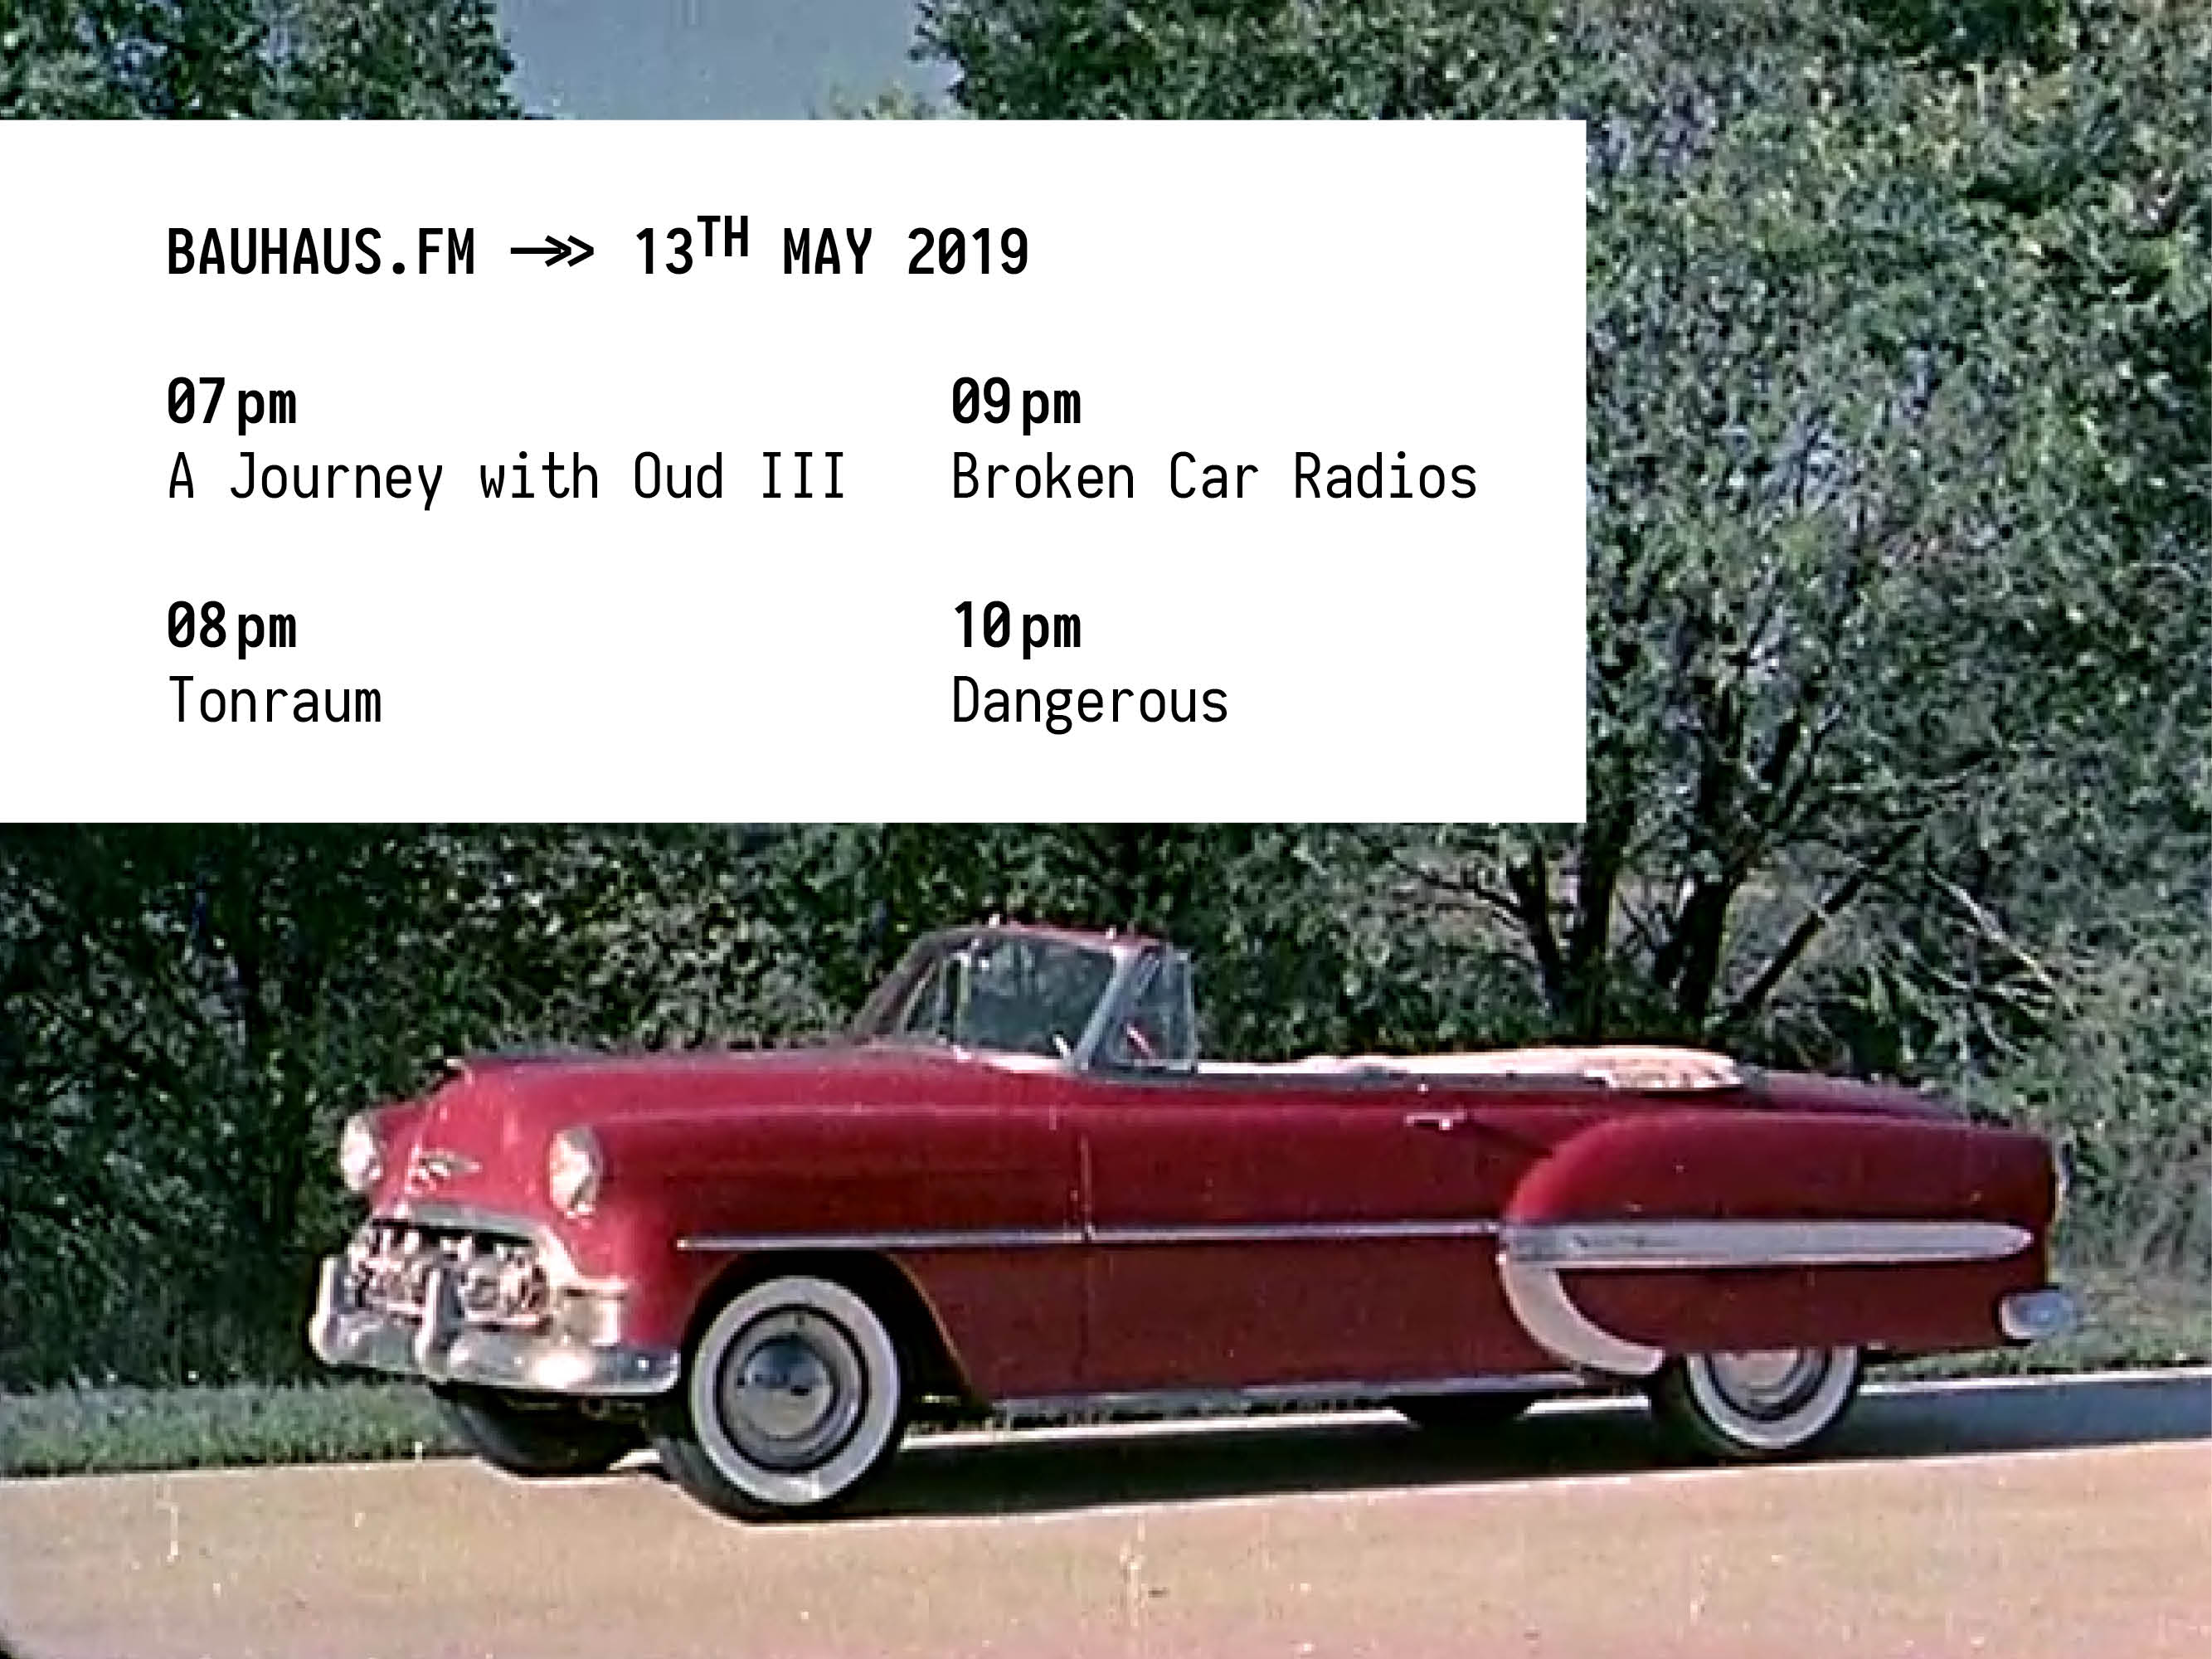 bauhaus.fm schedule for 13th May 2019